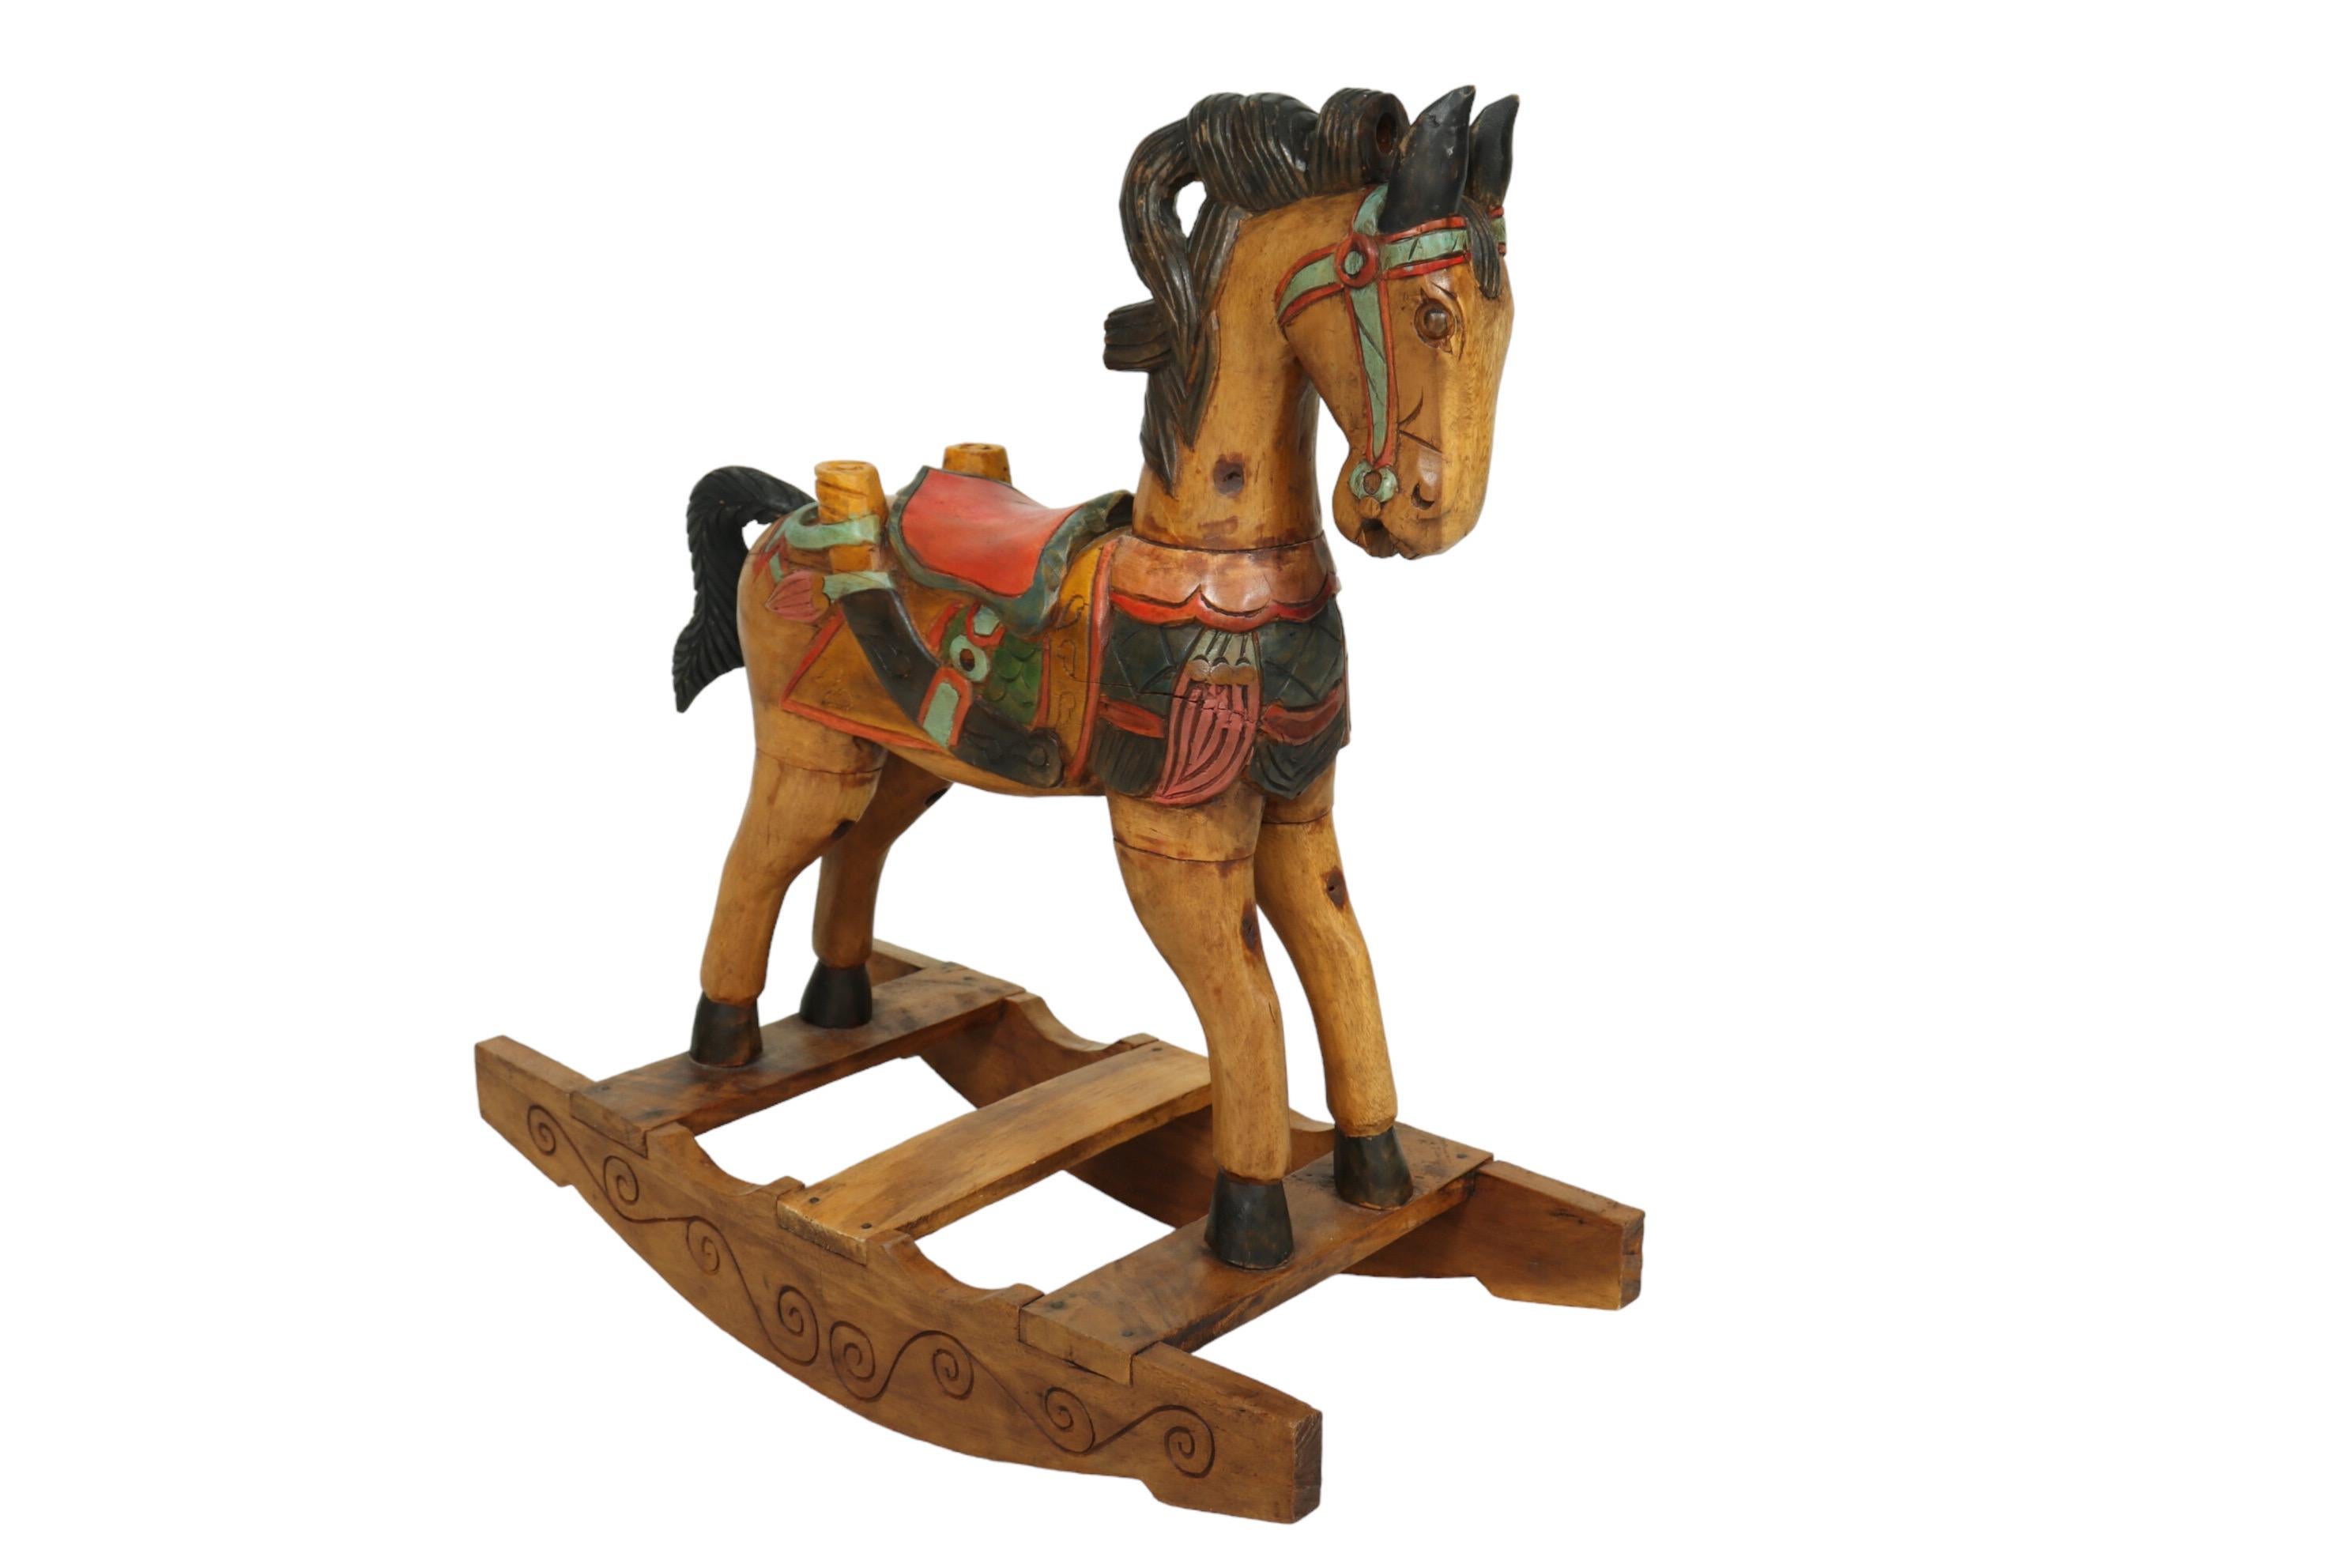 An Eastlake period carved rocking horse made of fruitwood. Beautifully carved throughout with attentive backward facing ears, round eyes and a curling mane. A colorful bridal and saddle are elaborately carved with scales, a wing motif and a sword